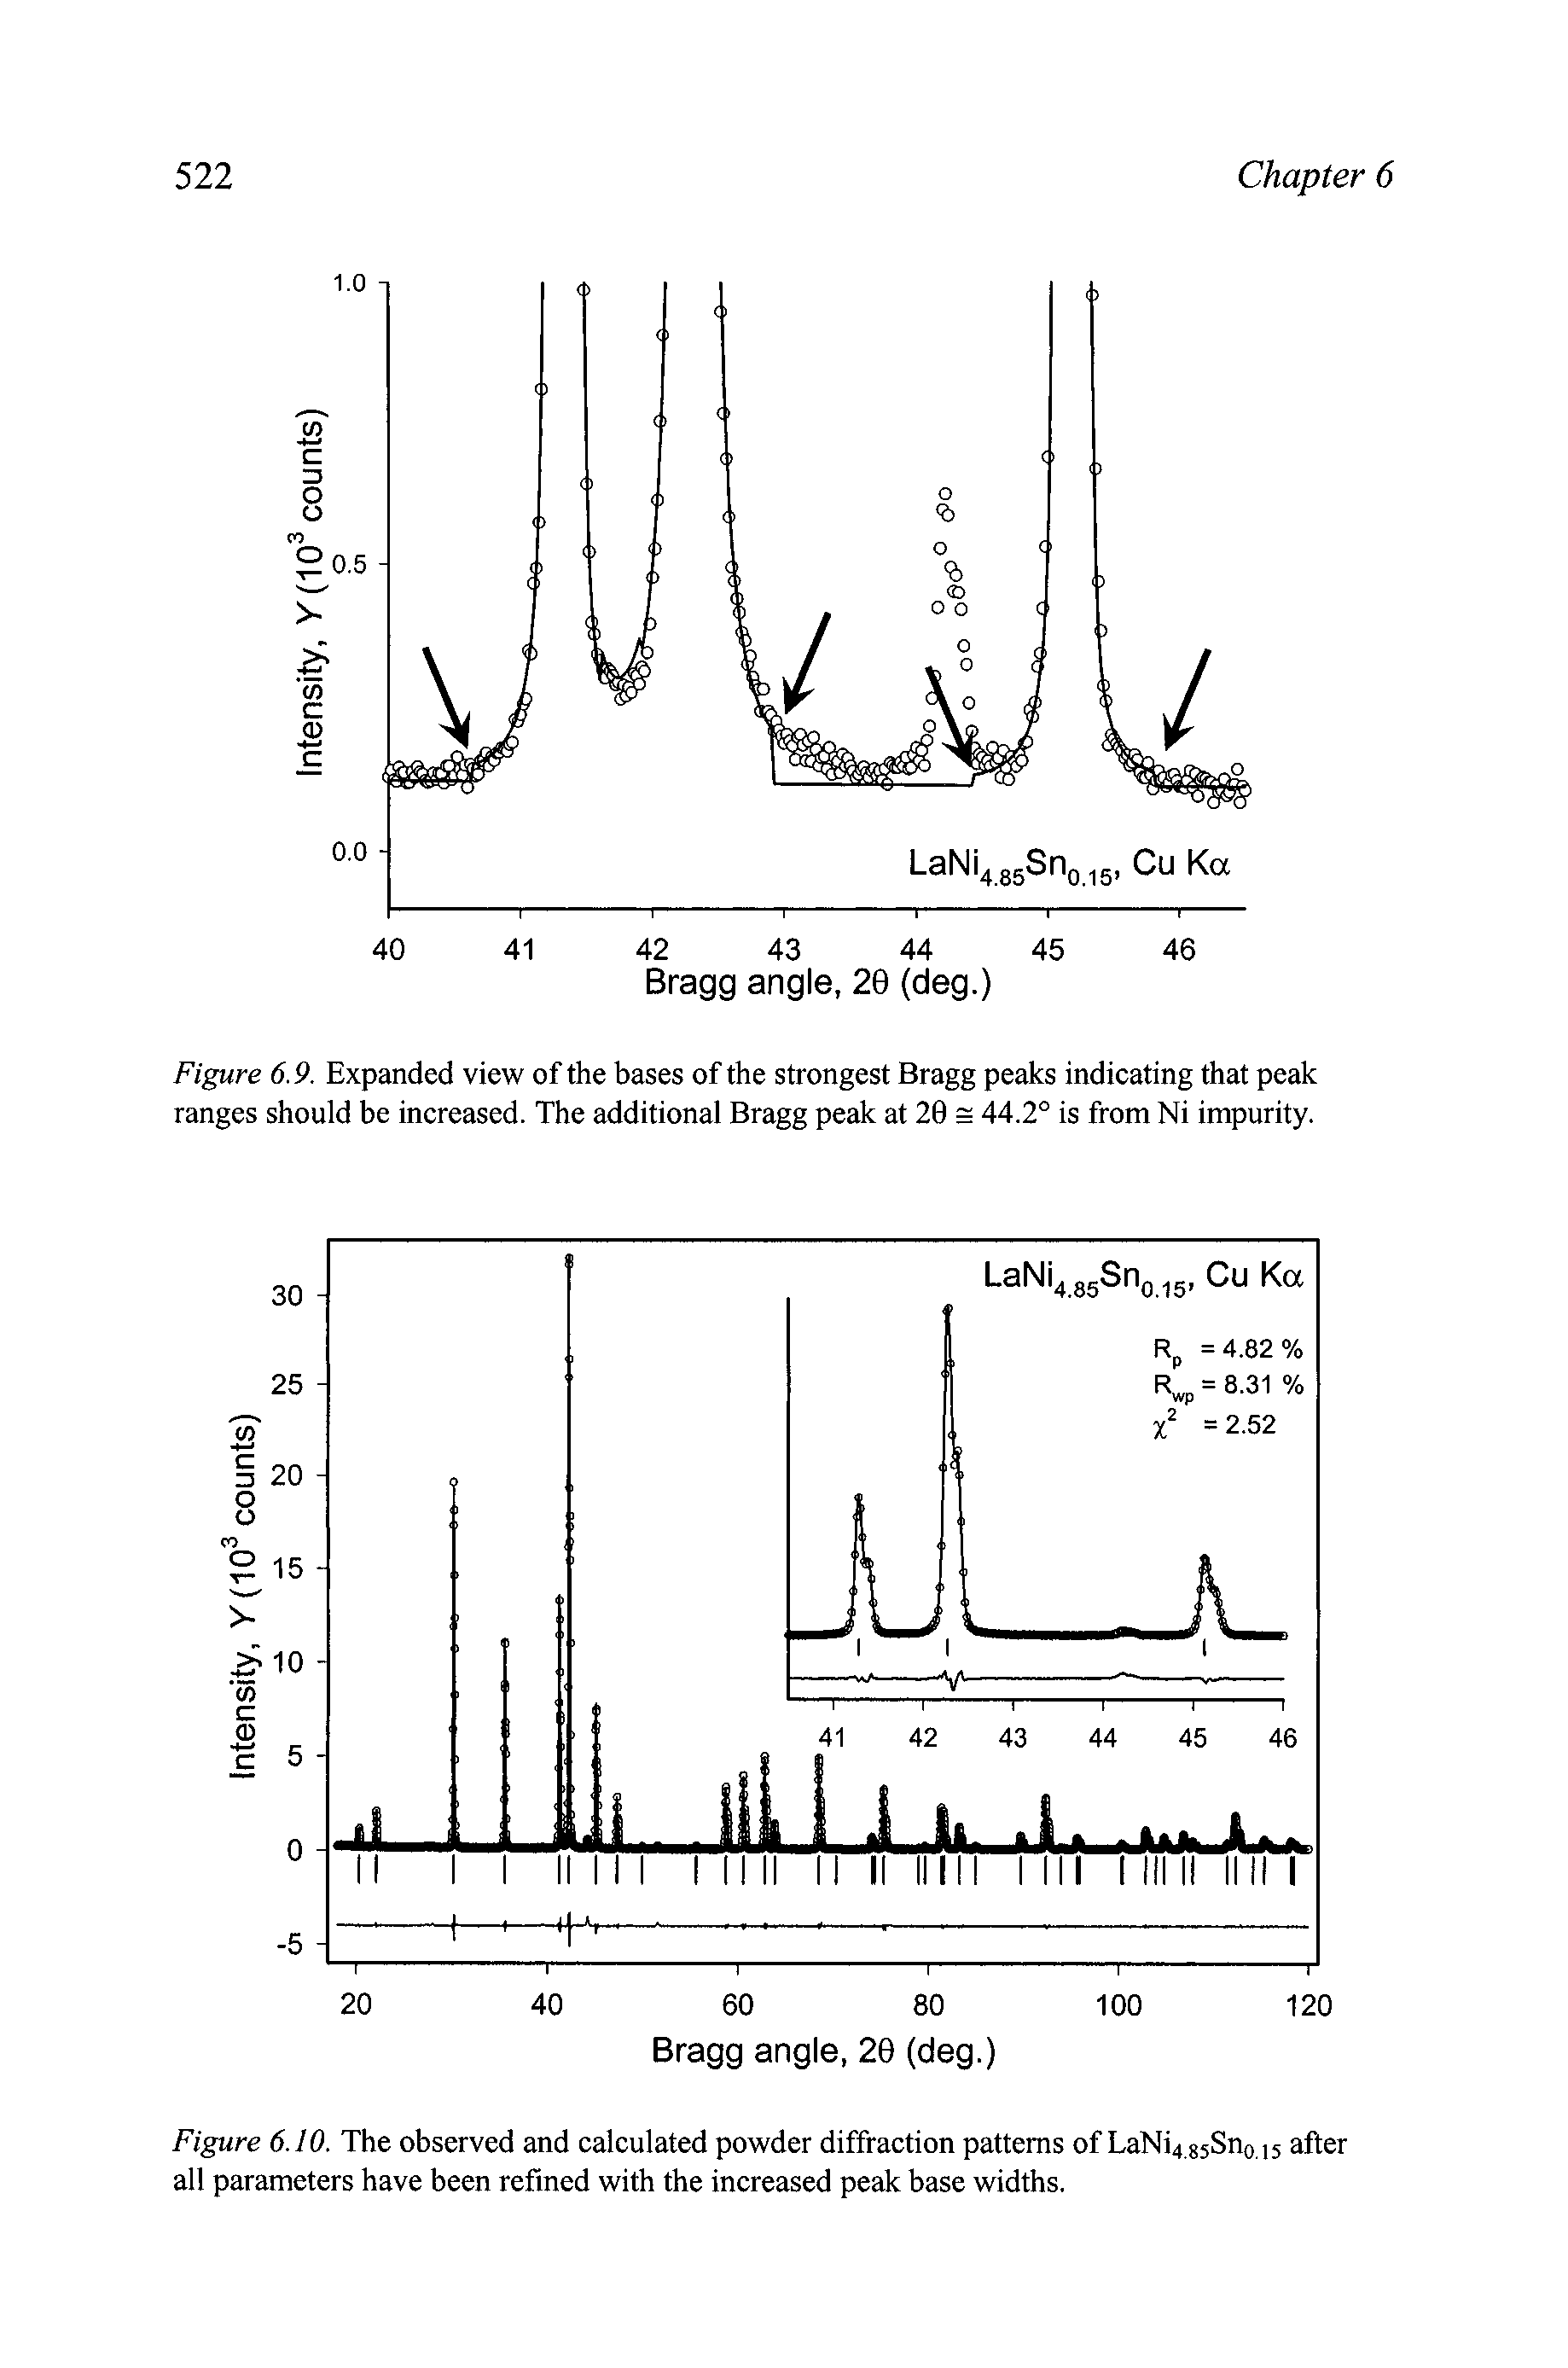 Figure 6.9. Expanded view of the bases of the strongest Bragg peaks indicating that peak ranges should be increased. The additional Bragg peak at 20 s 44.2° is from Ni impurity.